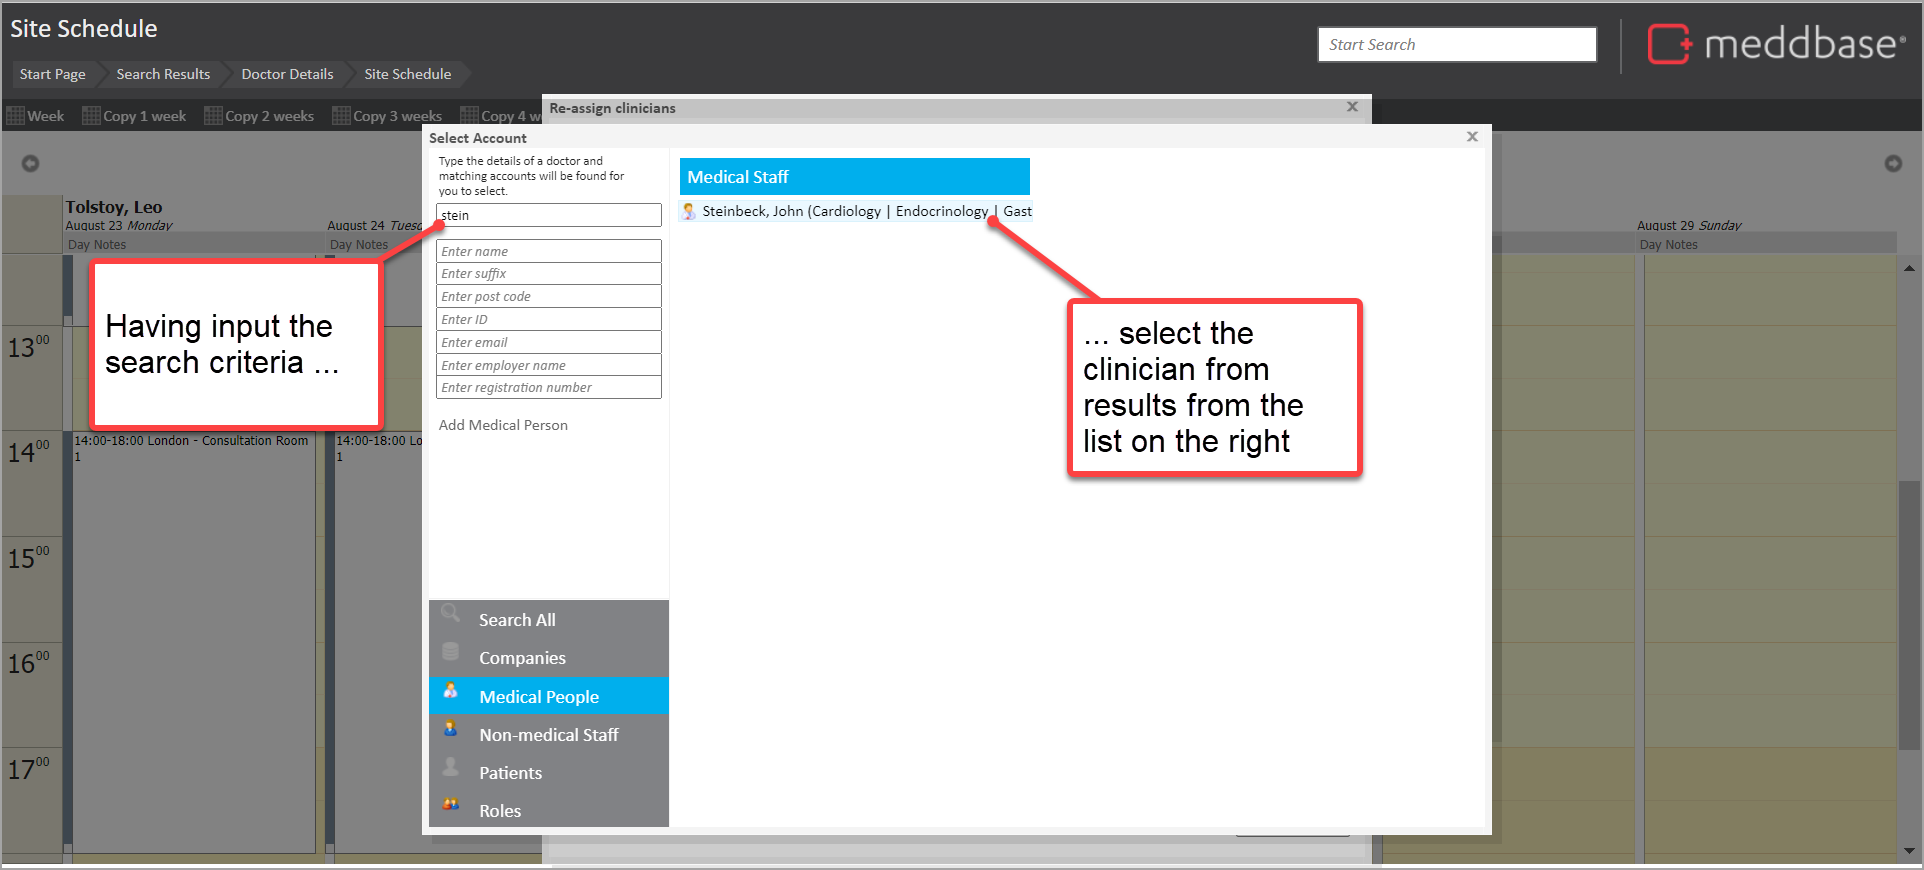 Select account dialog displayed with search criteria and results - including annotations describing search and selection